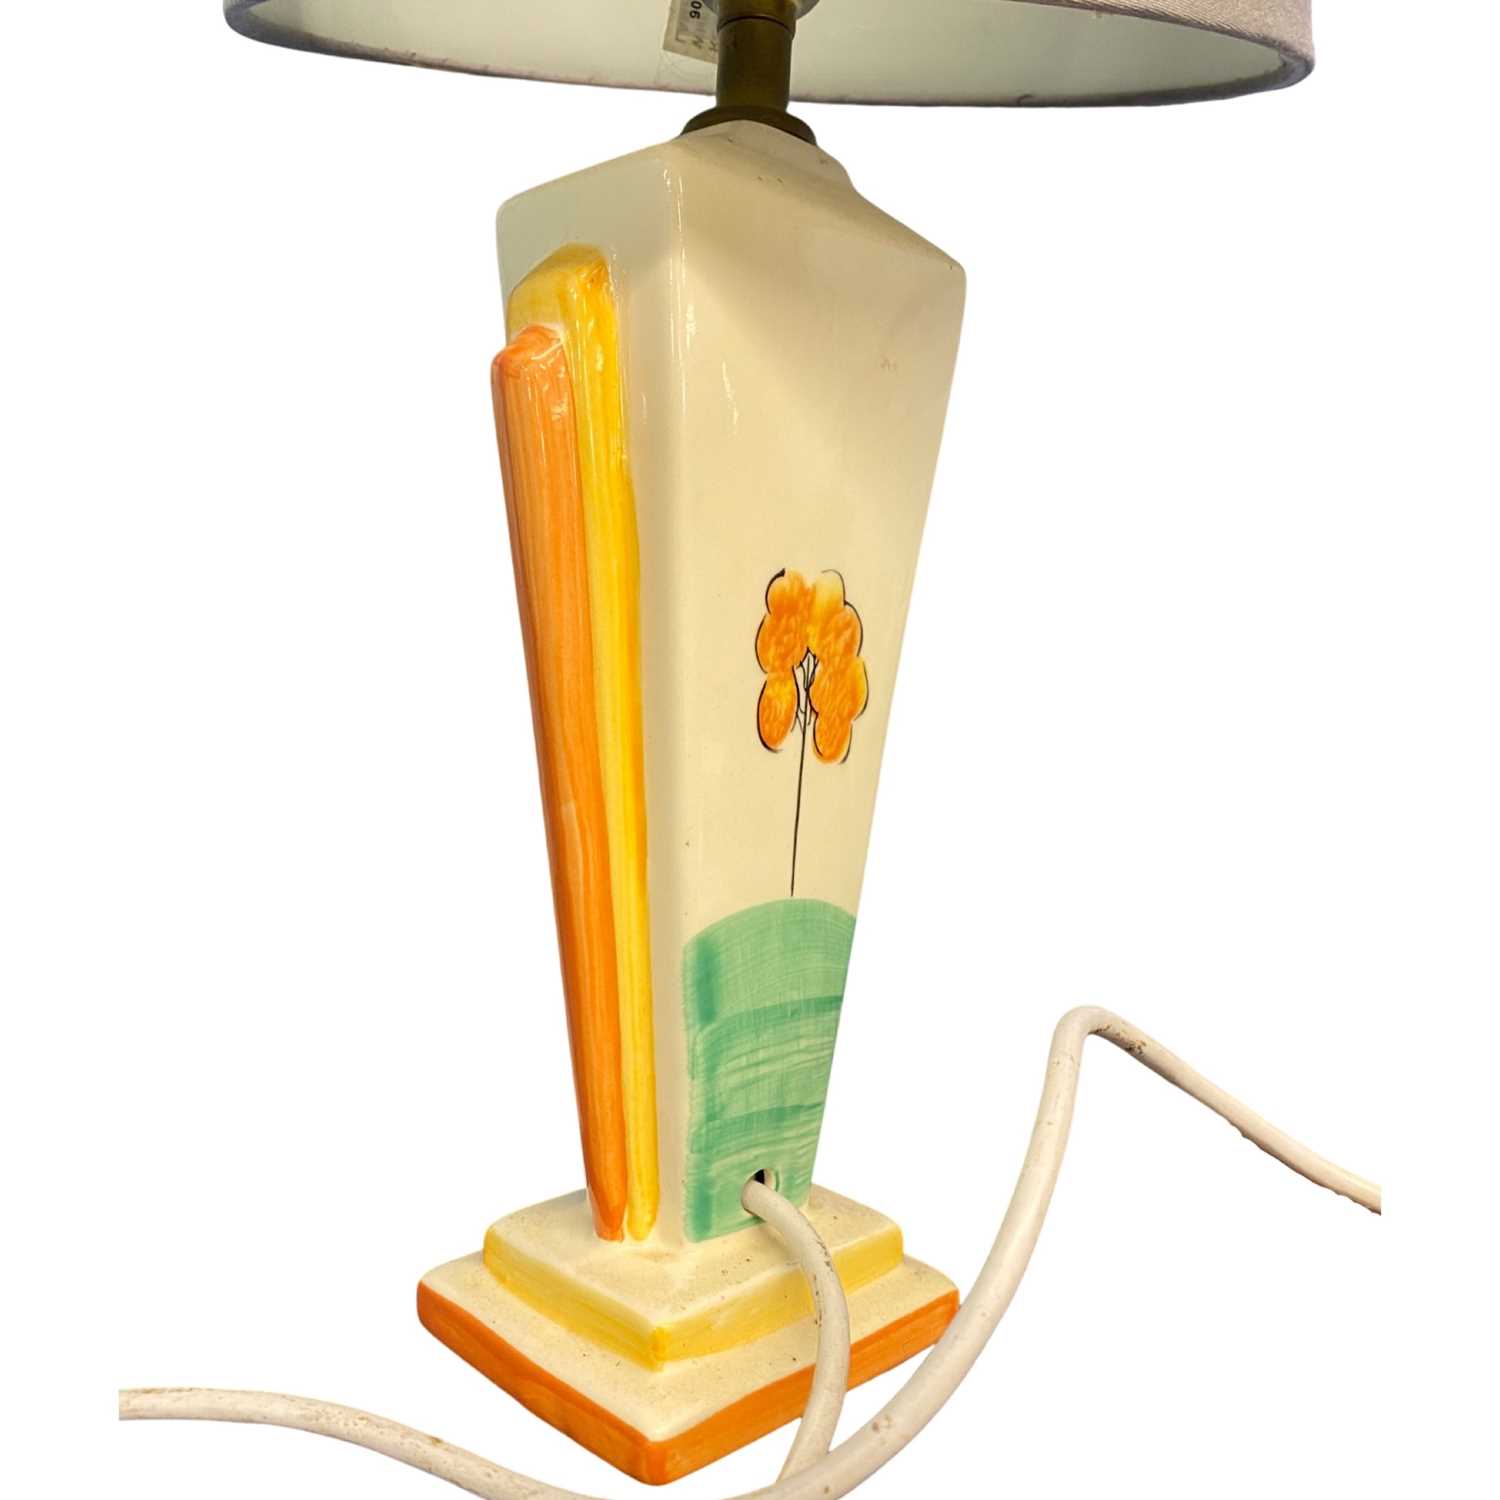 A table lamp with a Clarice Cliff type design - Image 3 of 3